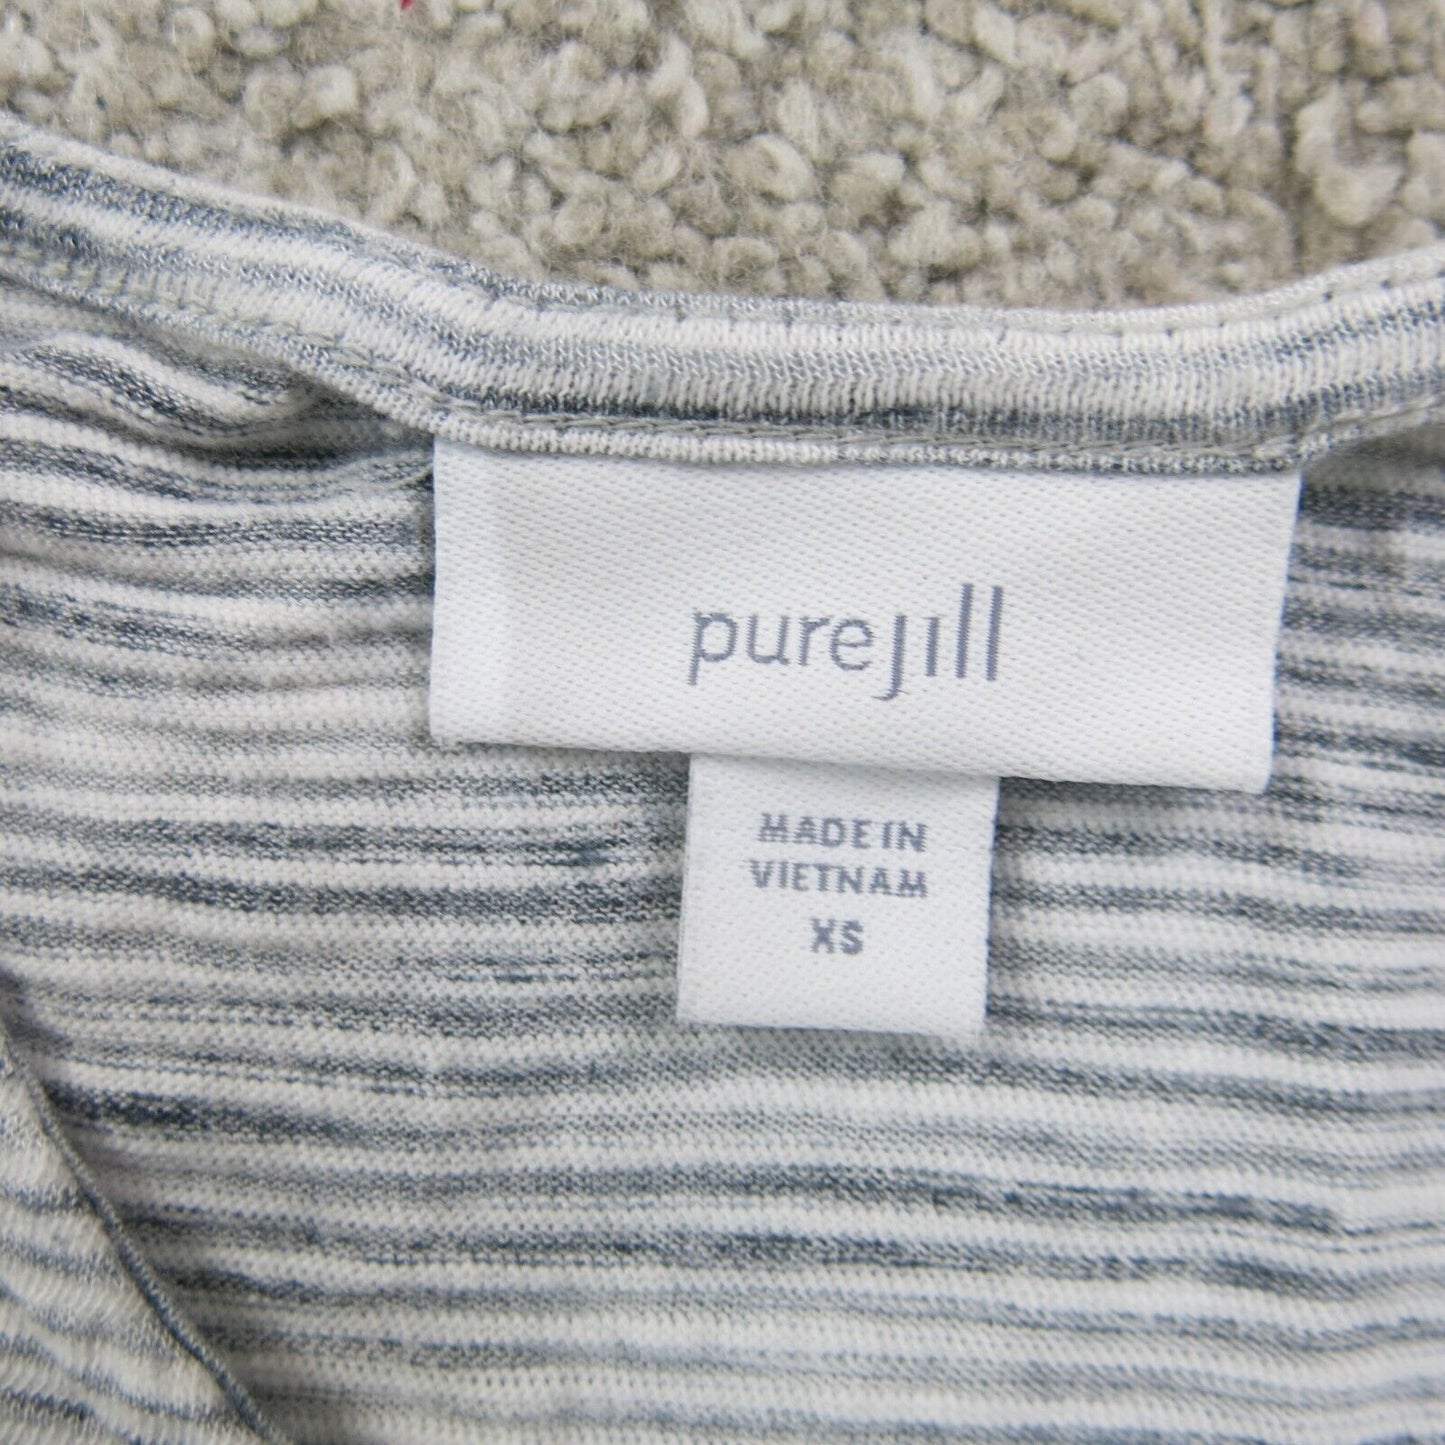 Pure J Jill Womens Knitted Sweater Crew Neck 2 Hand Pocket Heather